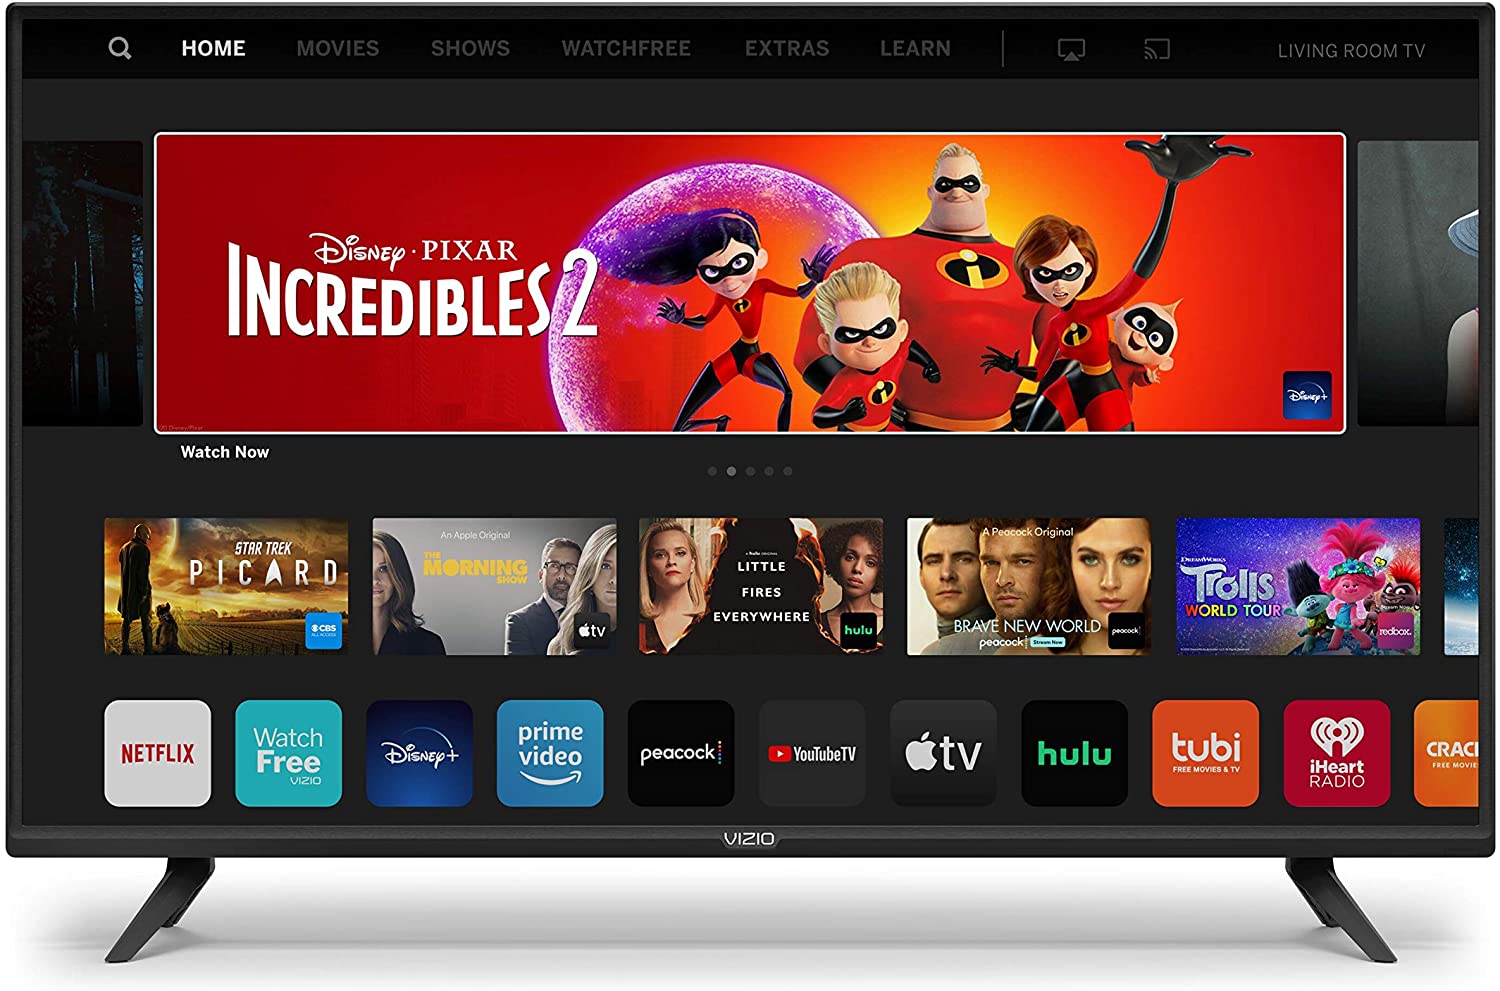 <strong>9. VIZIO 24-inch D-Series Full HD 1080p Smart TV</strong>